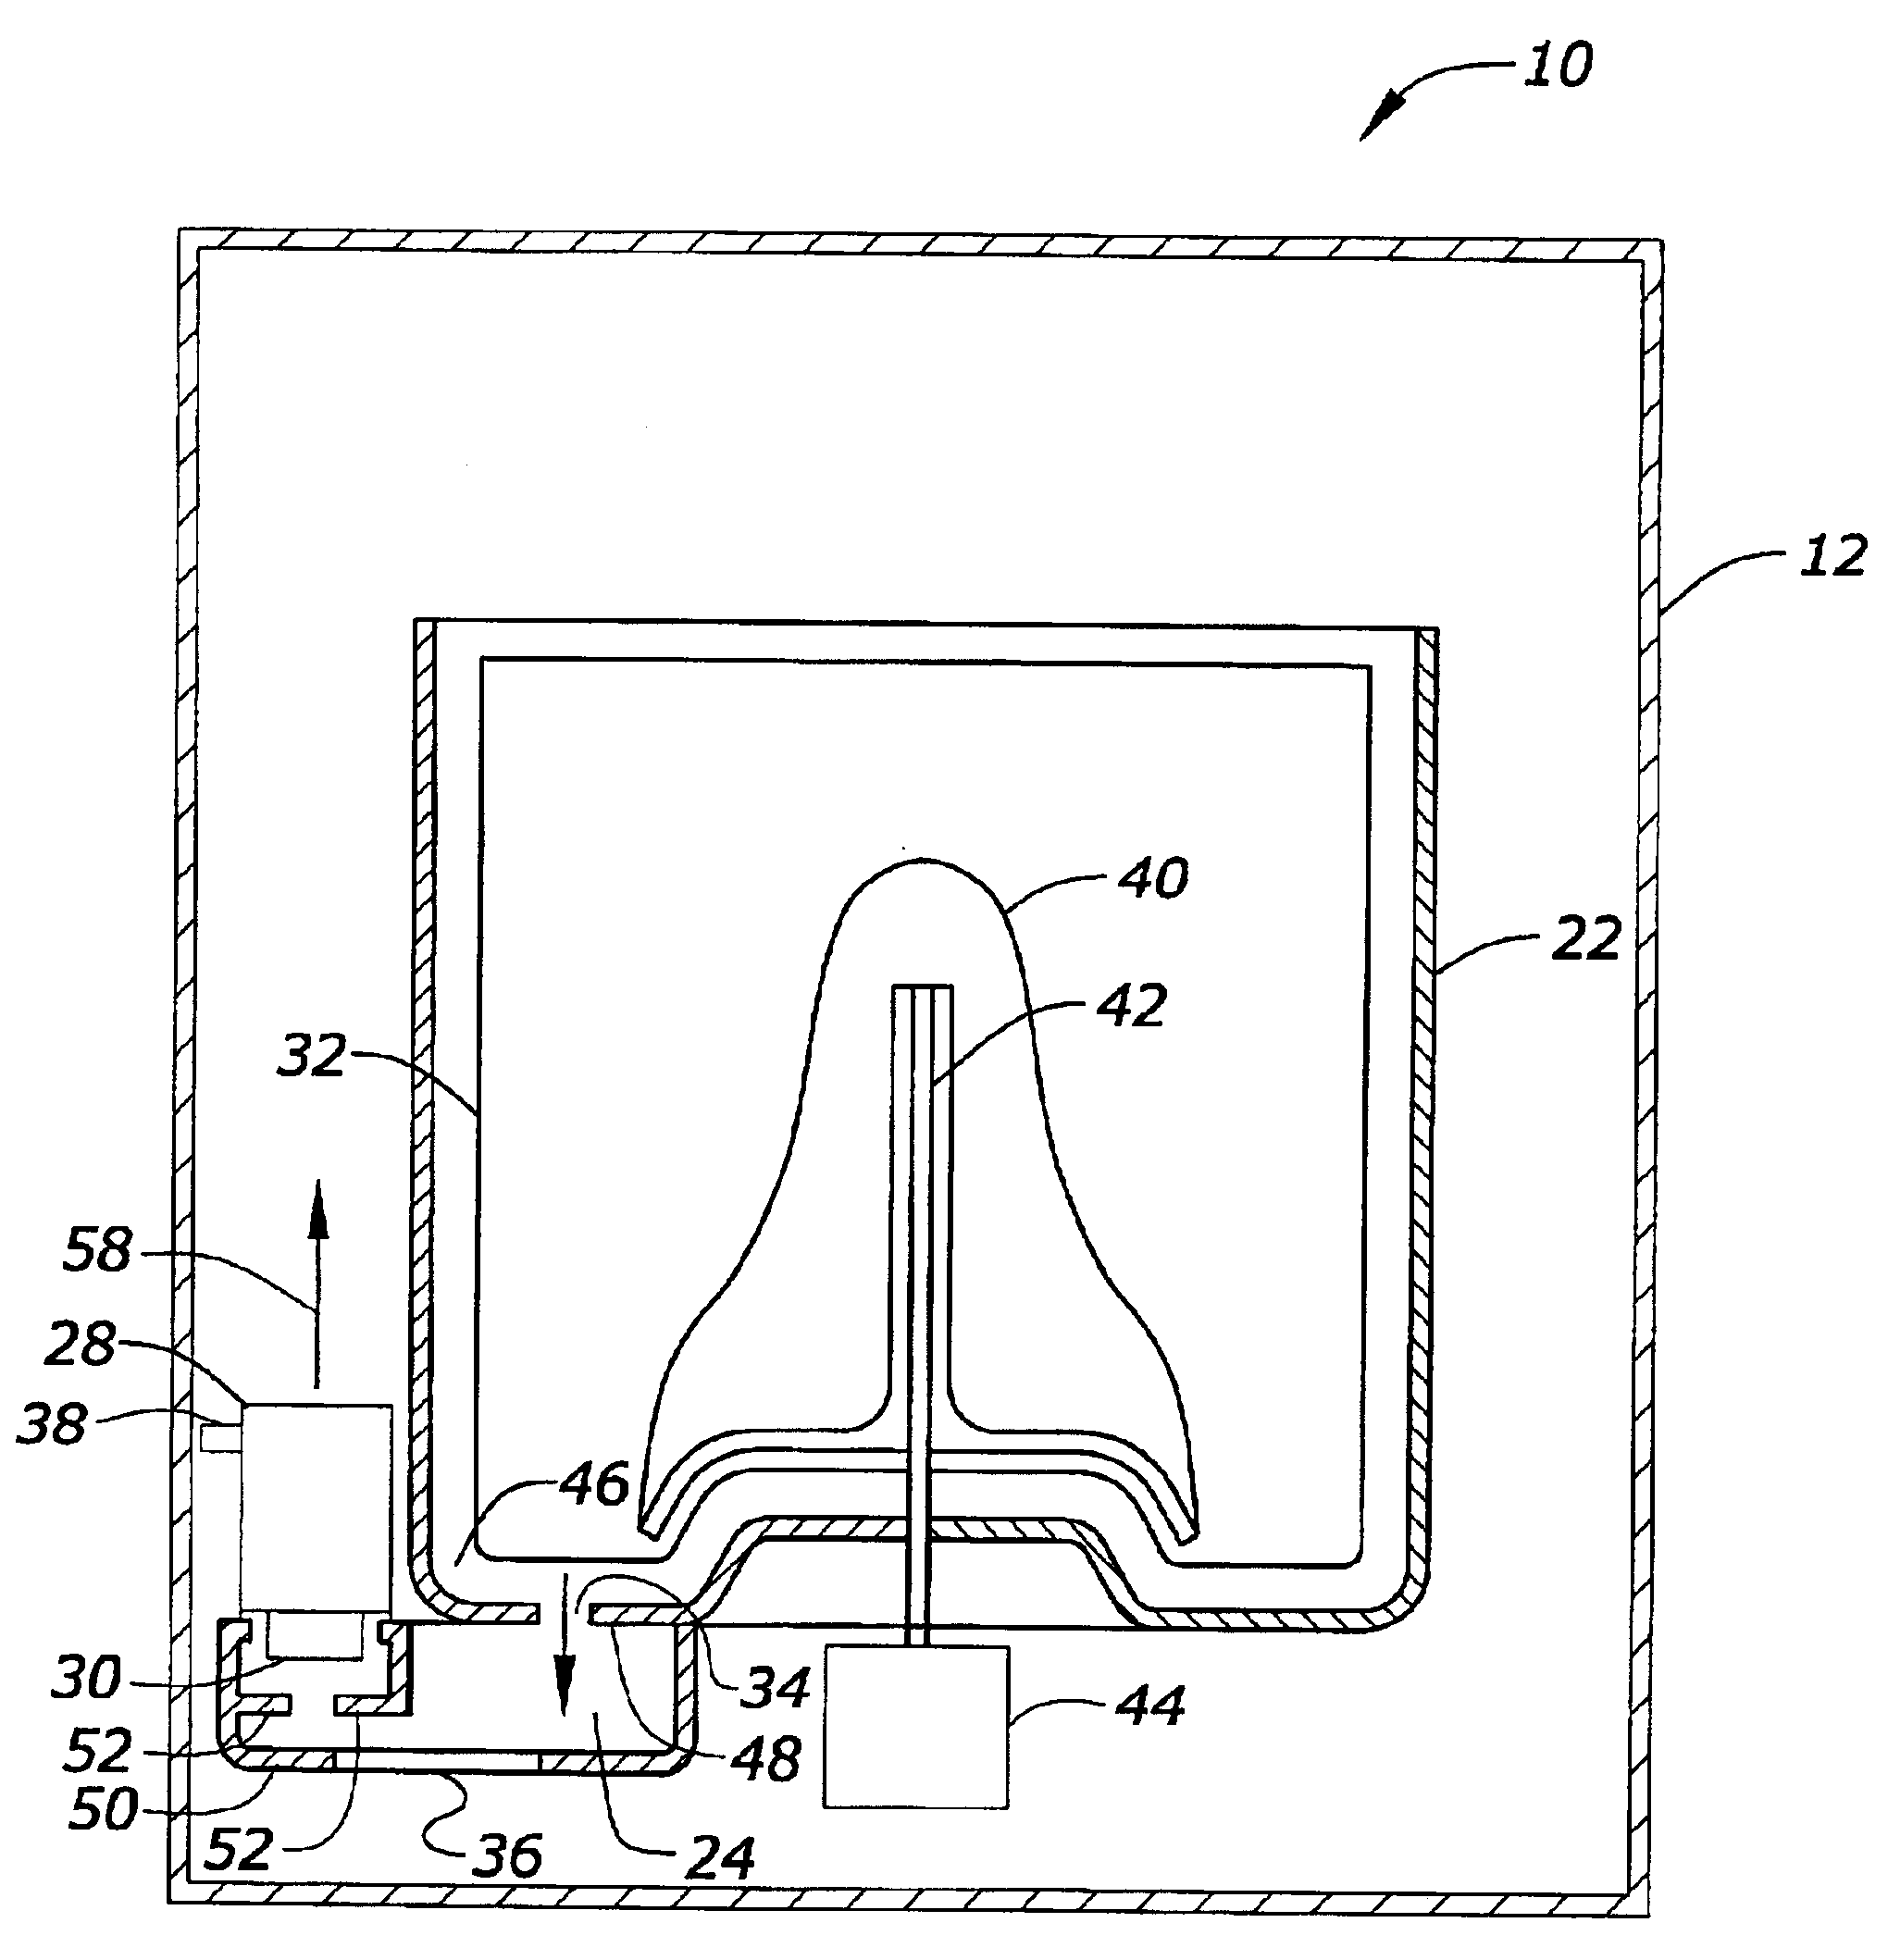 Tub mounted, vertically oriented pump